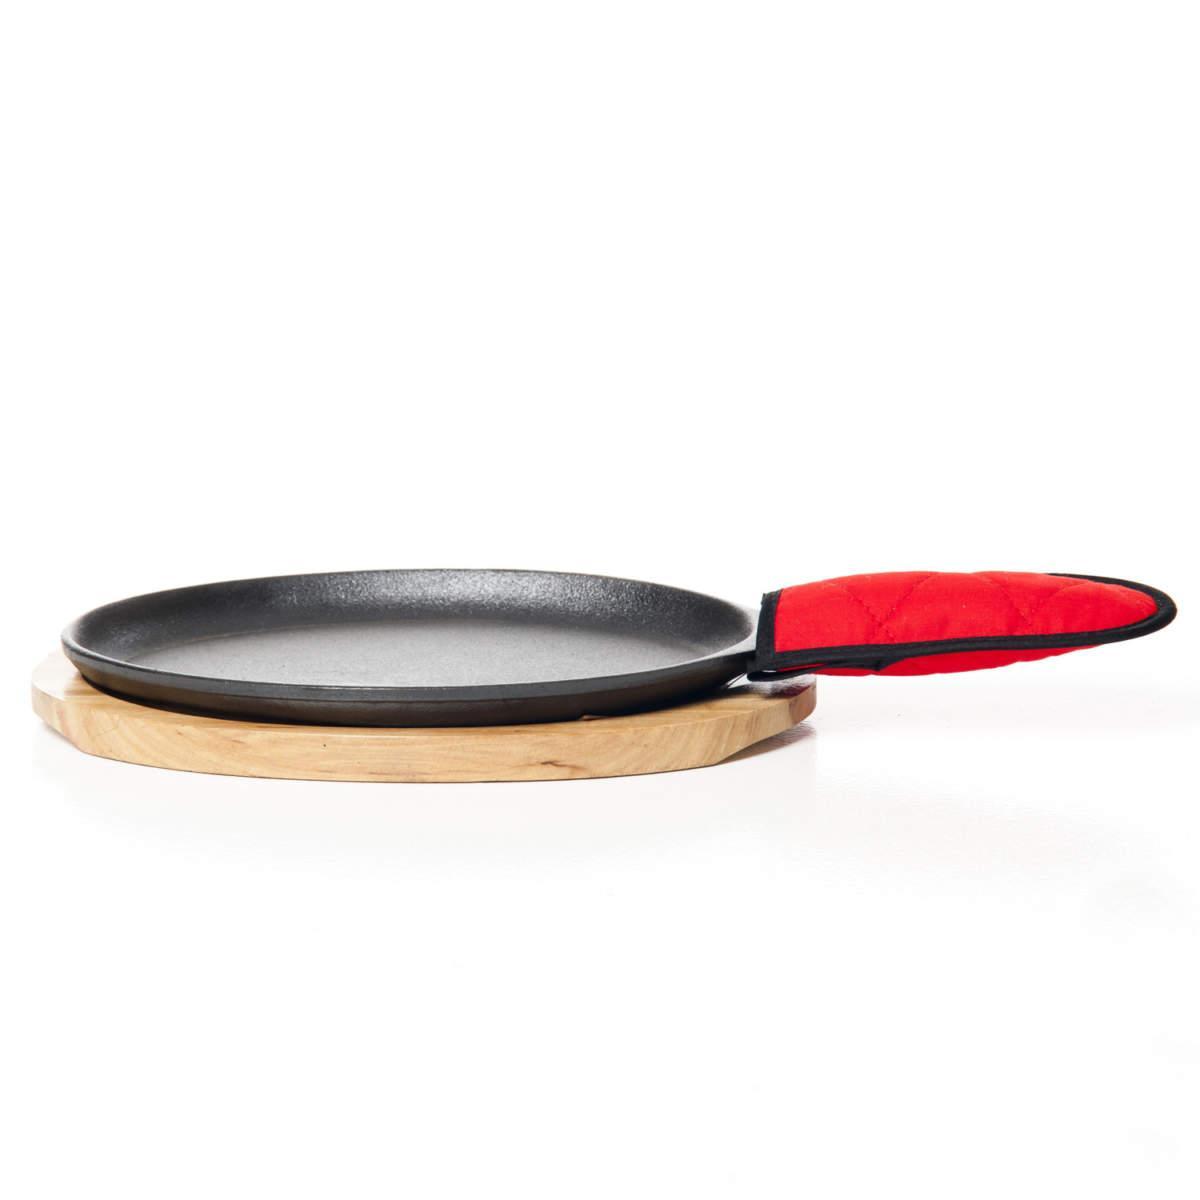 https://www.dutchcountrygeneralstore.com/wp-content/uploads/2017/02/cast-iron-fajita-plate-with-wood-case-and-hot-pad-by-OLD-MOUNTAIN-LLC.jpg